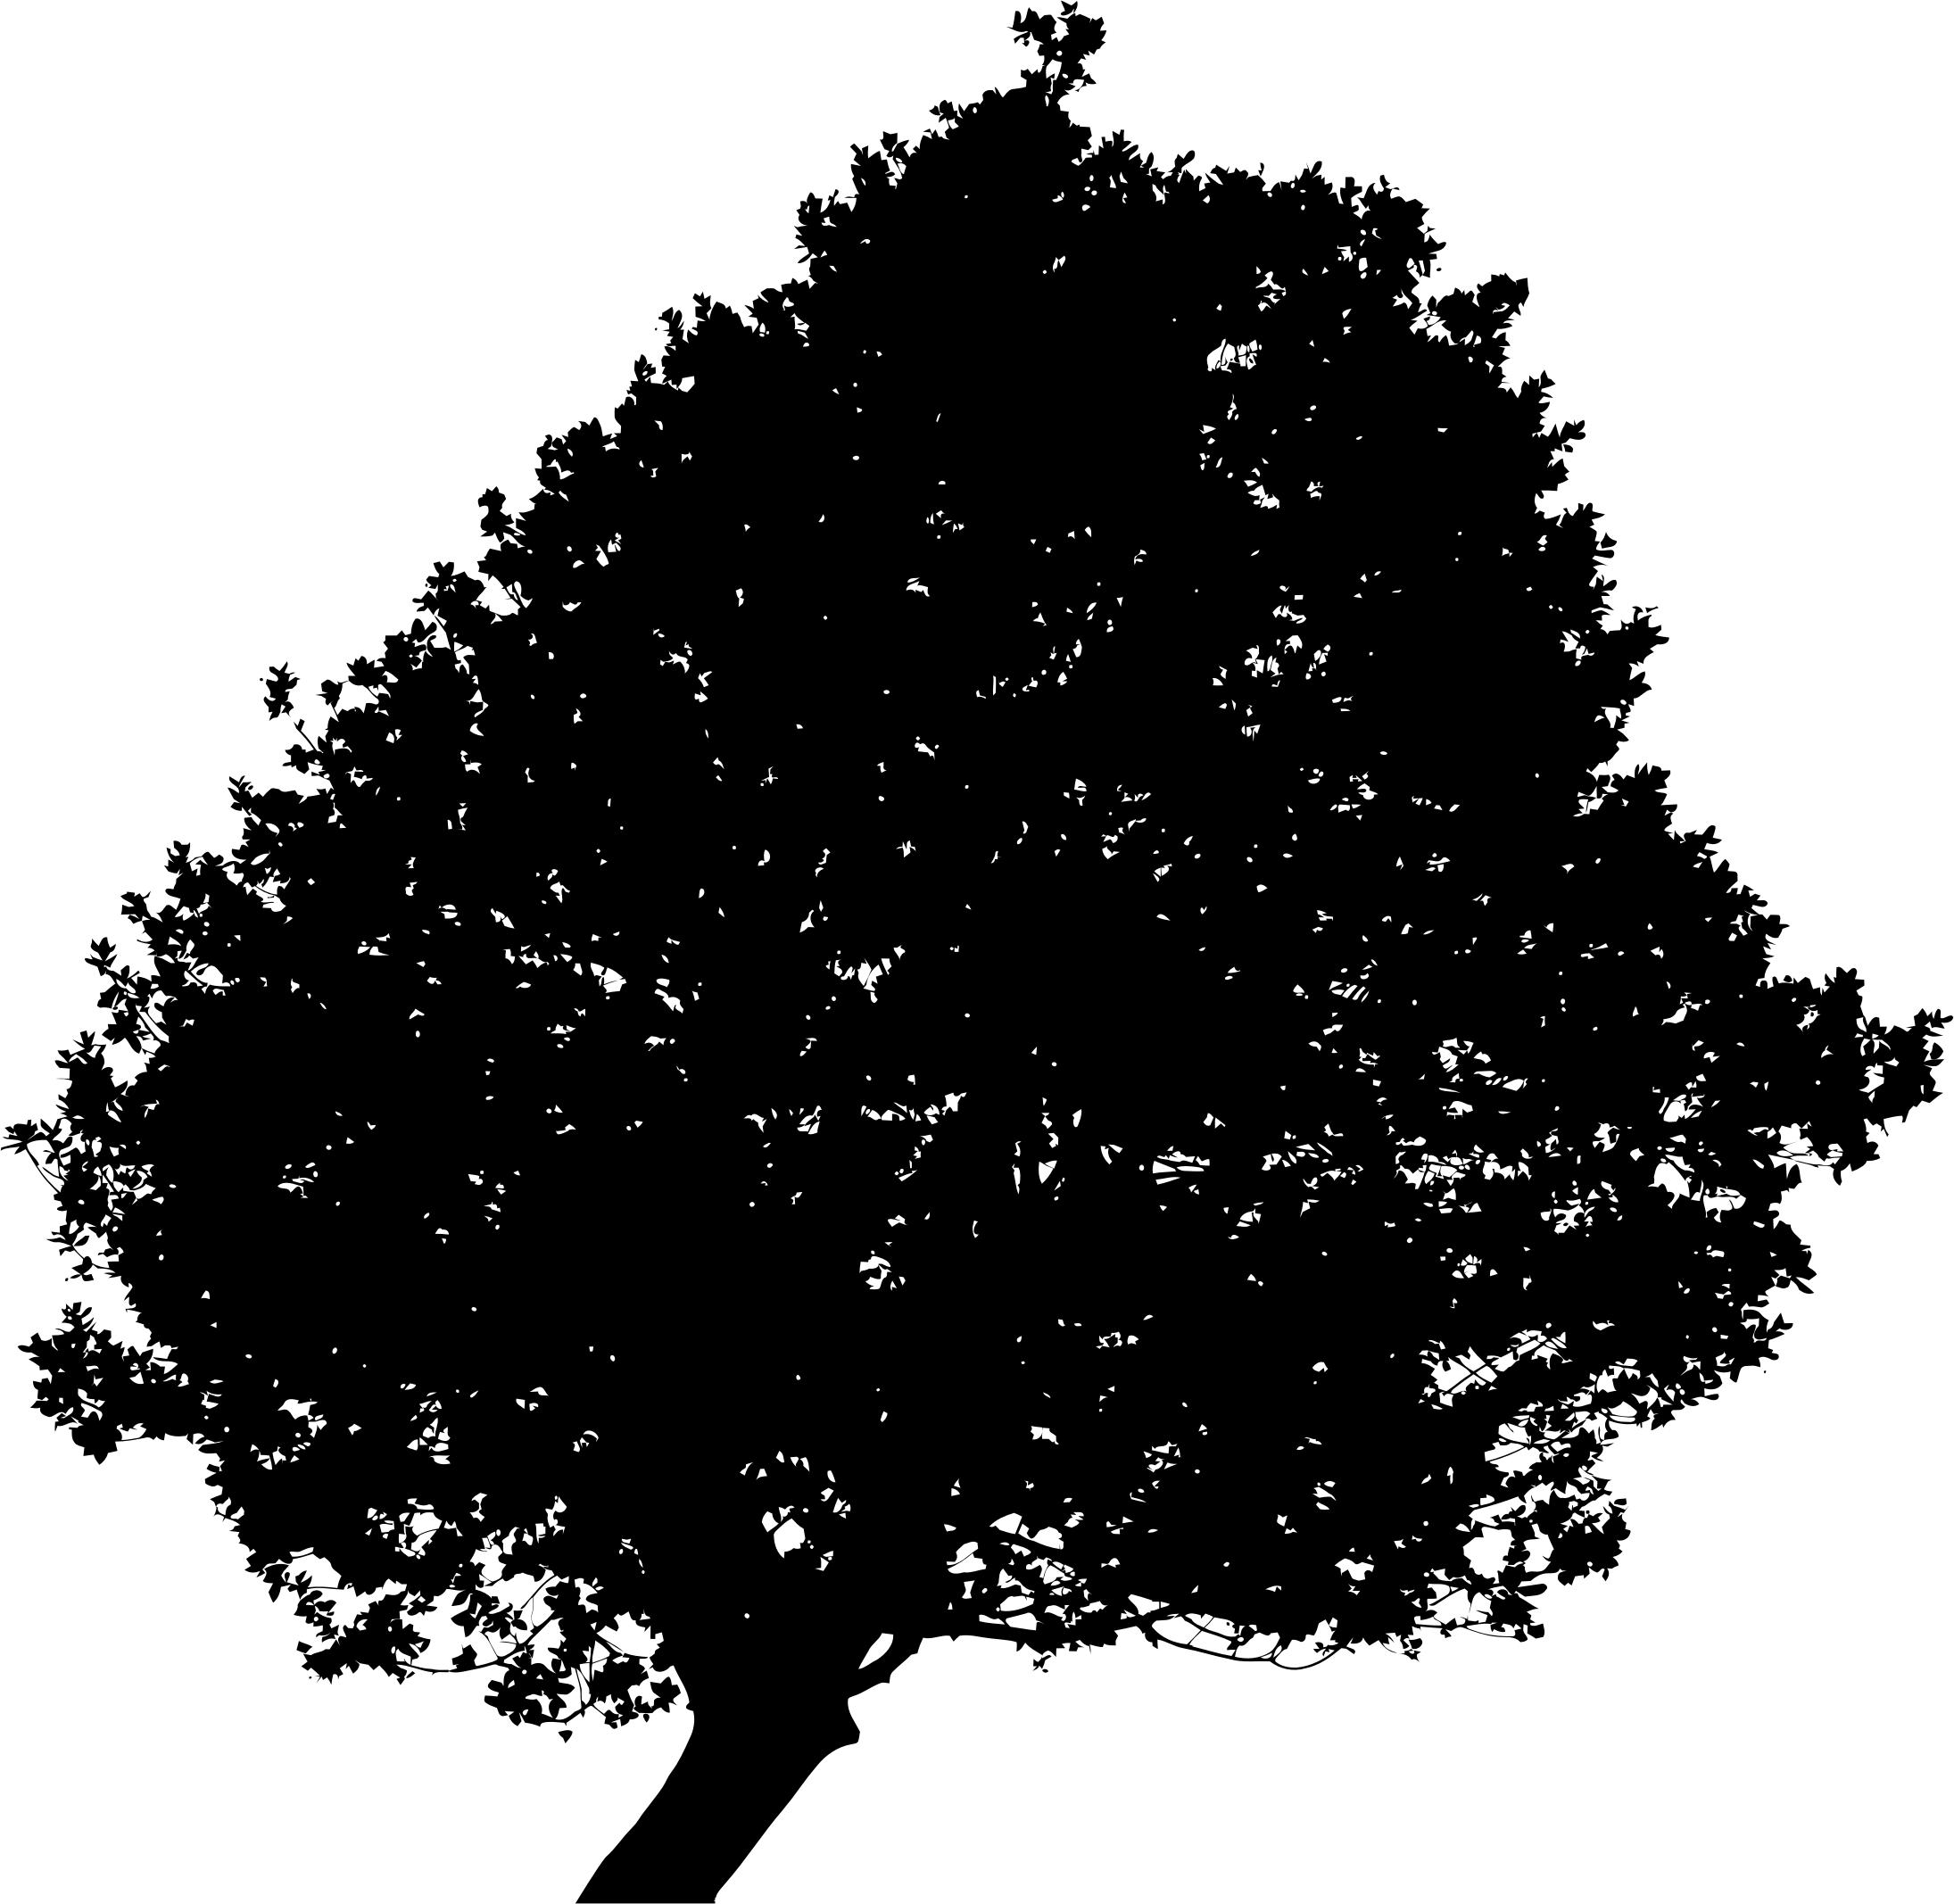 Lonely Tree Silhouette 2 Minus Ground png